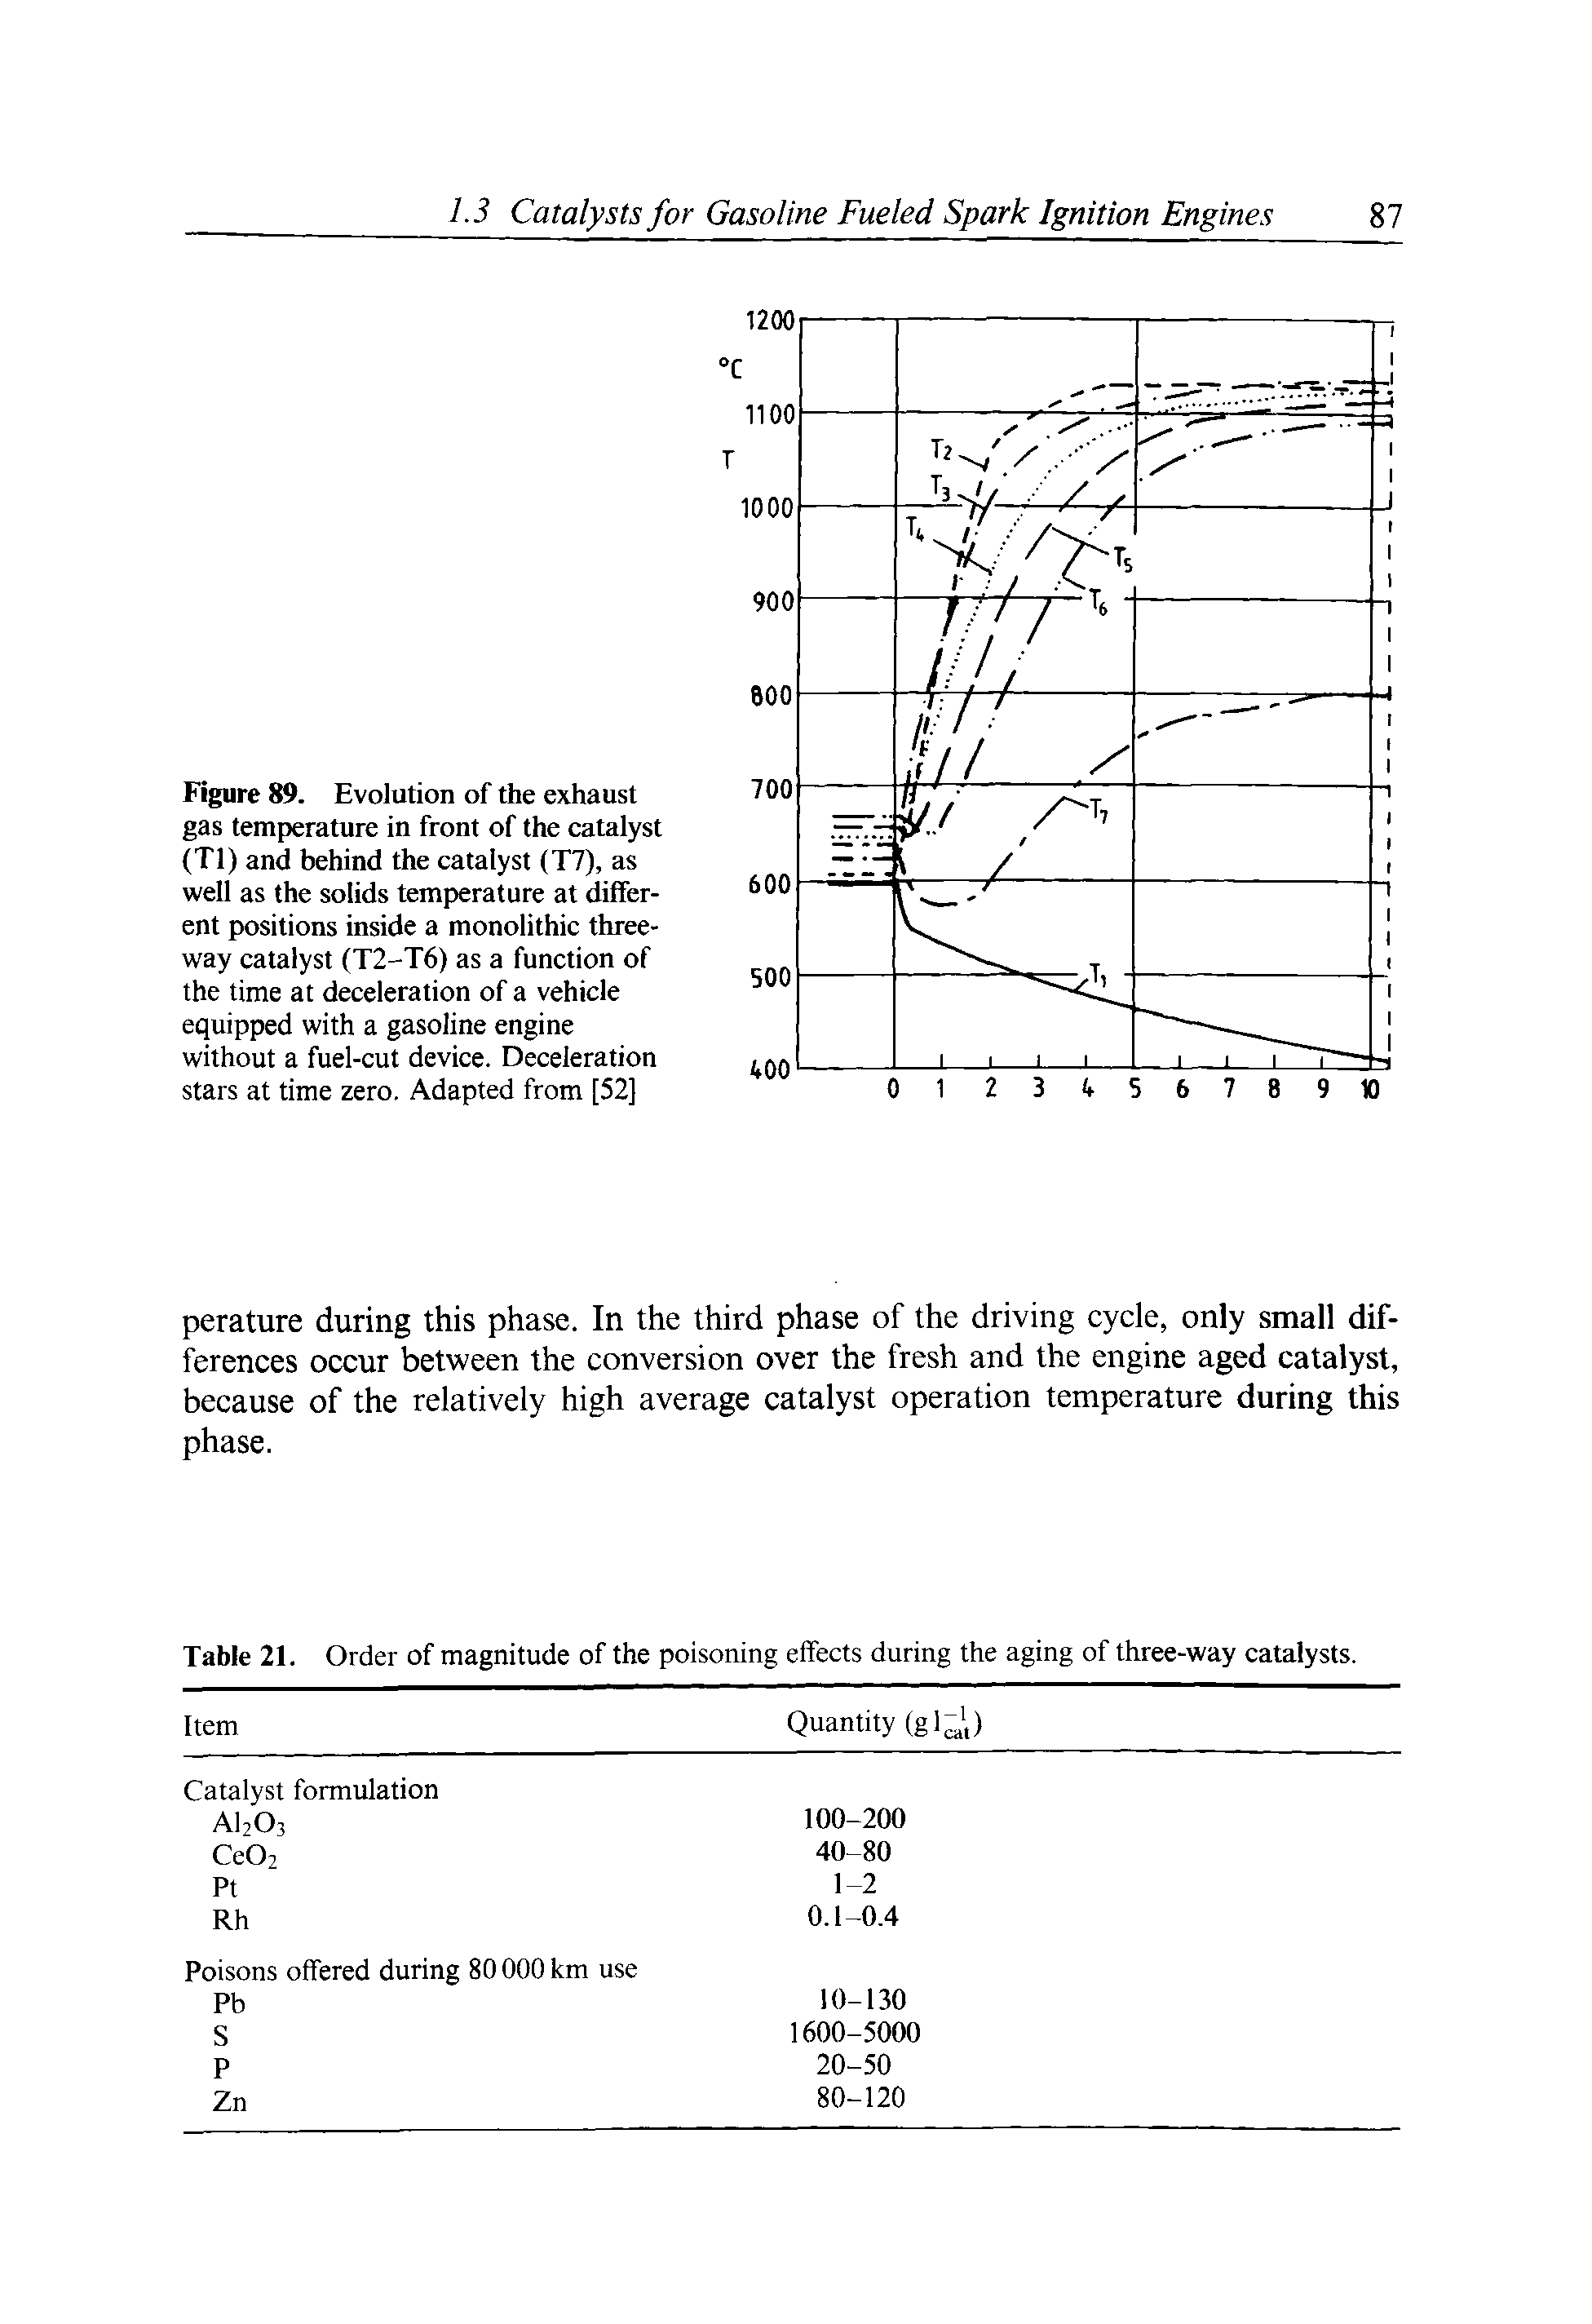 Figure 89. Evolution of the exhaust gas temperature in front of the catalyst (Tl) and behind the catalyst (T7), as well as the solids temperature at different positions inside a monolithic three-way catalyst (T2-T6) as a function of the time at deceleration of a vehicle equipped with a gasoline engine without a fuel-cut device. Deceleration stars at time zero. Adapted from [52]...